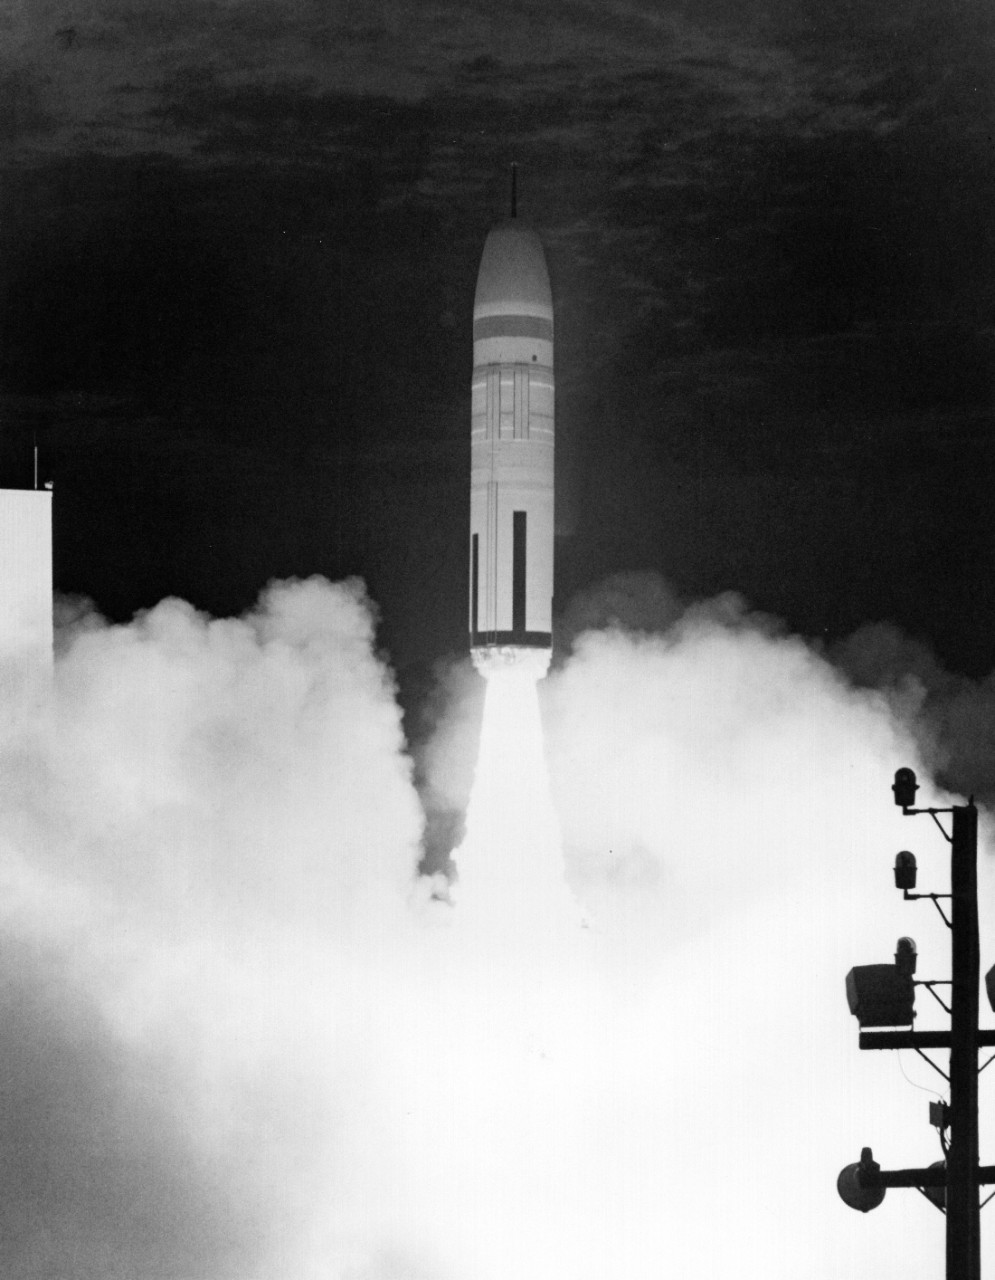 <p>L55-19-06-014 Test Launch of Trident at Cape Canaveral</p>
